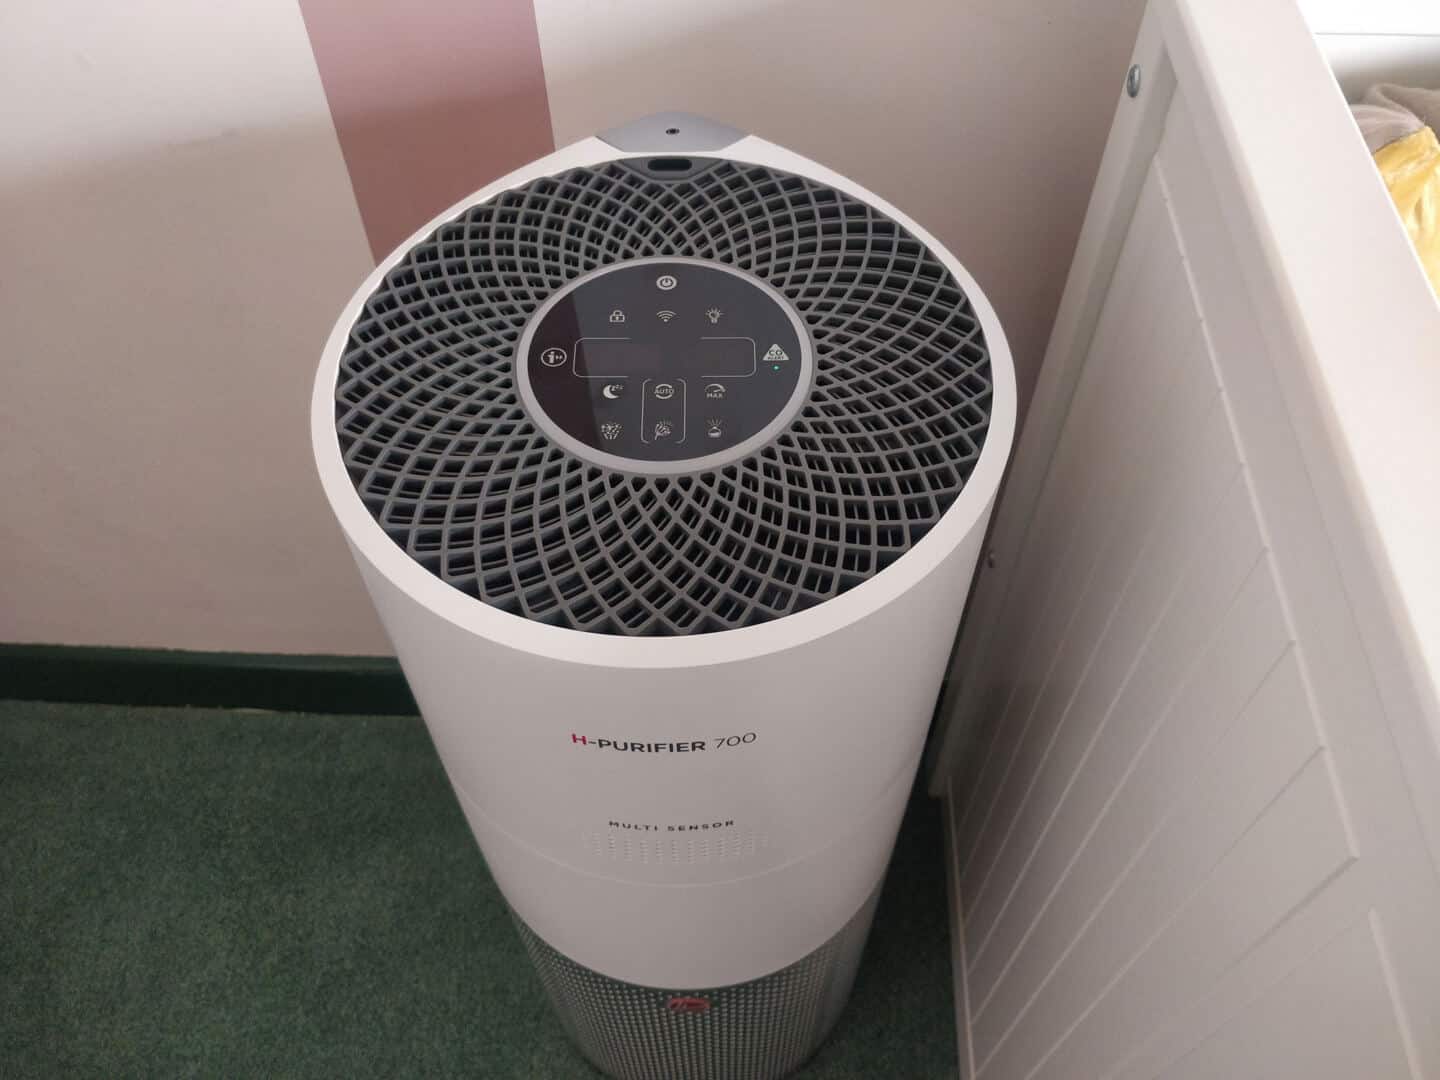 The Hoover Air Purifier 700 stands next to a day bed in a bedroom.